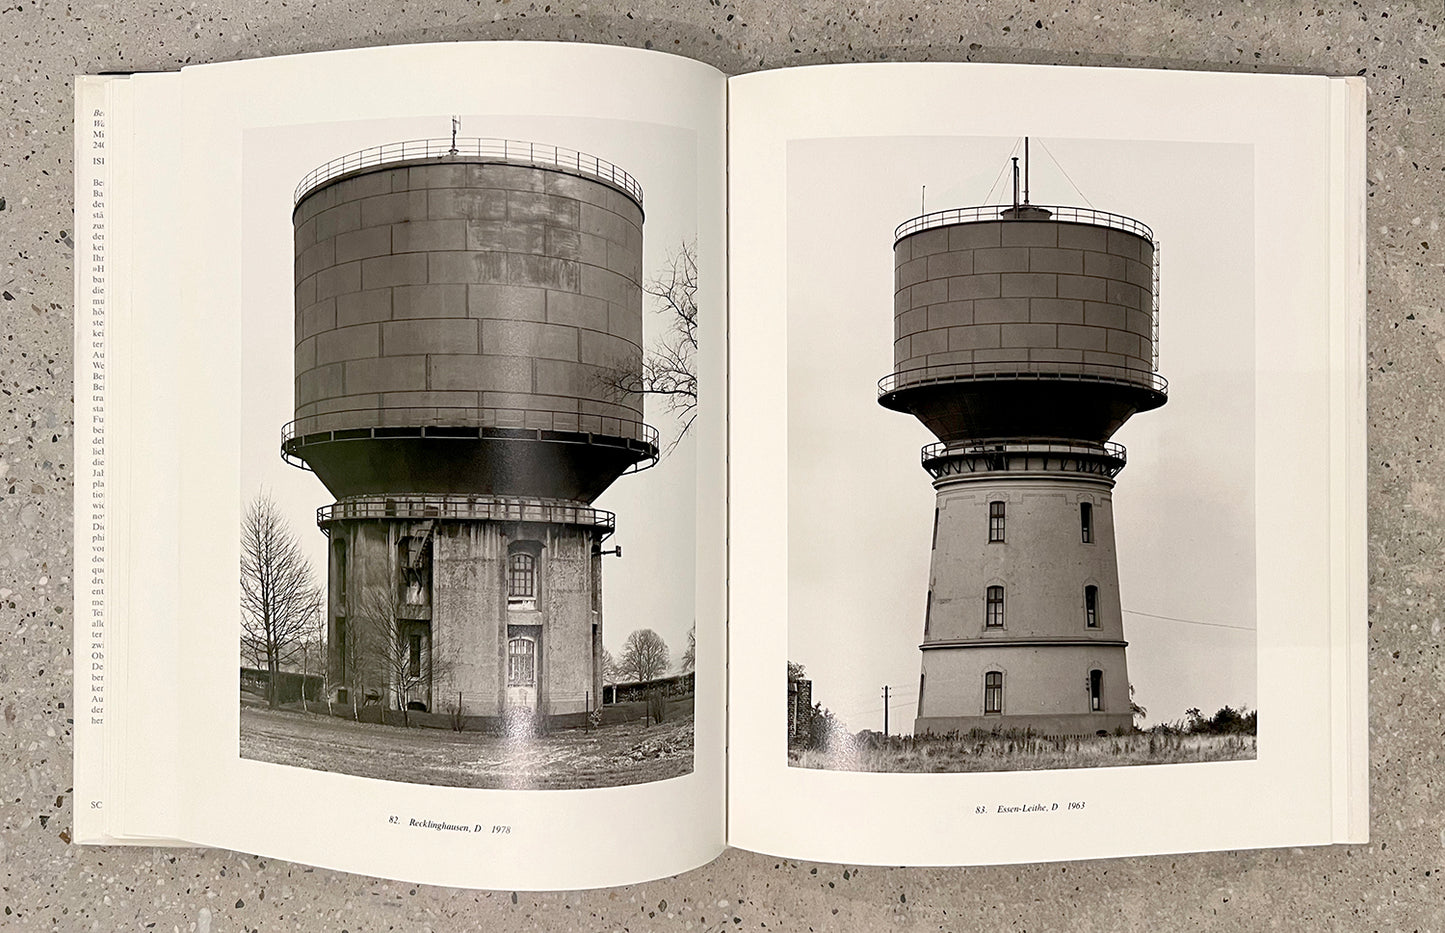 Bernd and Hilla Becher-The first 15 books published, all first editions